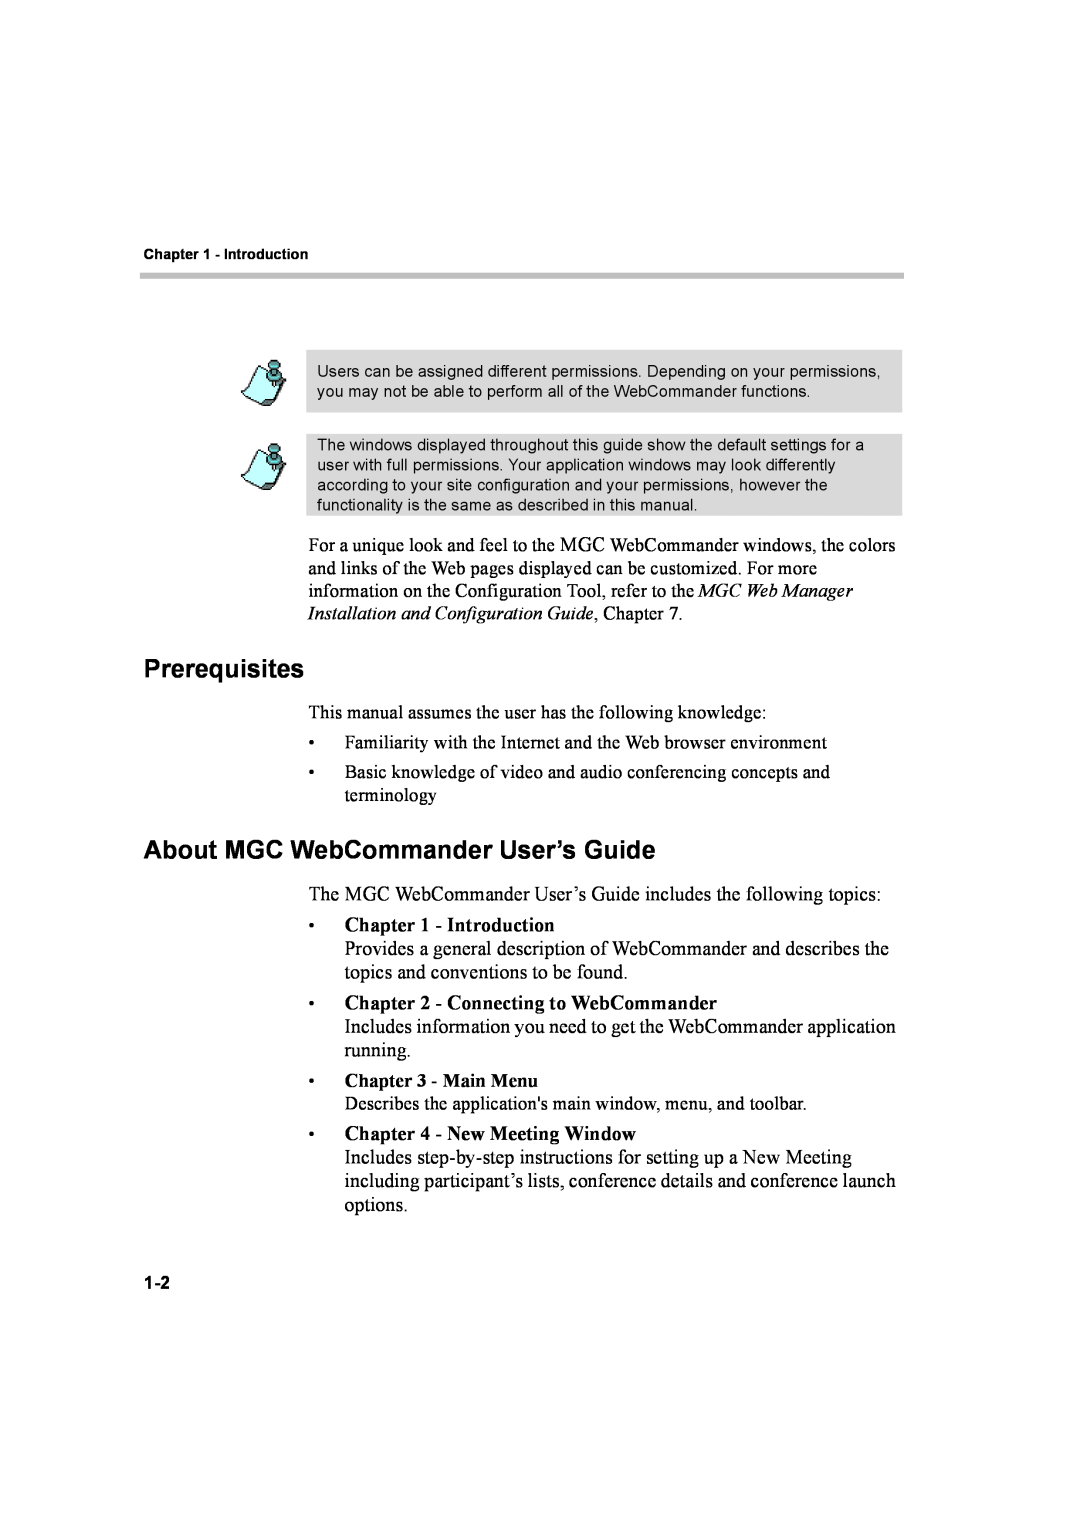 Polycom 8 manual Prerequisites, About MGC WebCommander User’s Guide, • - Introduction, • - Connecting to WebCommander 